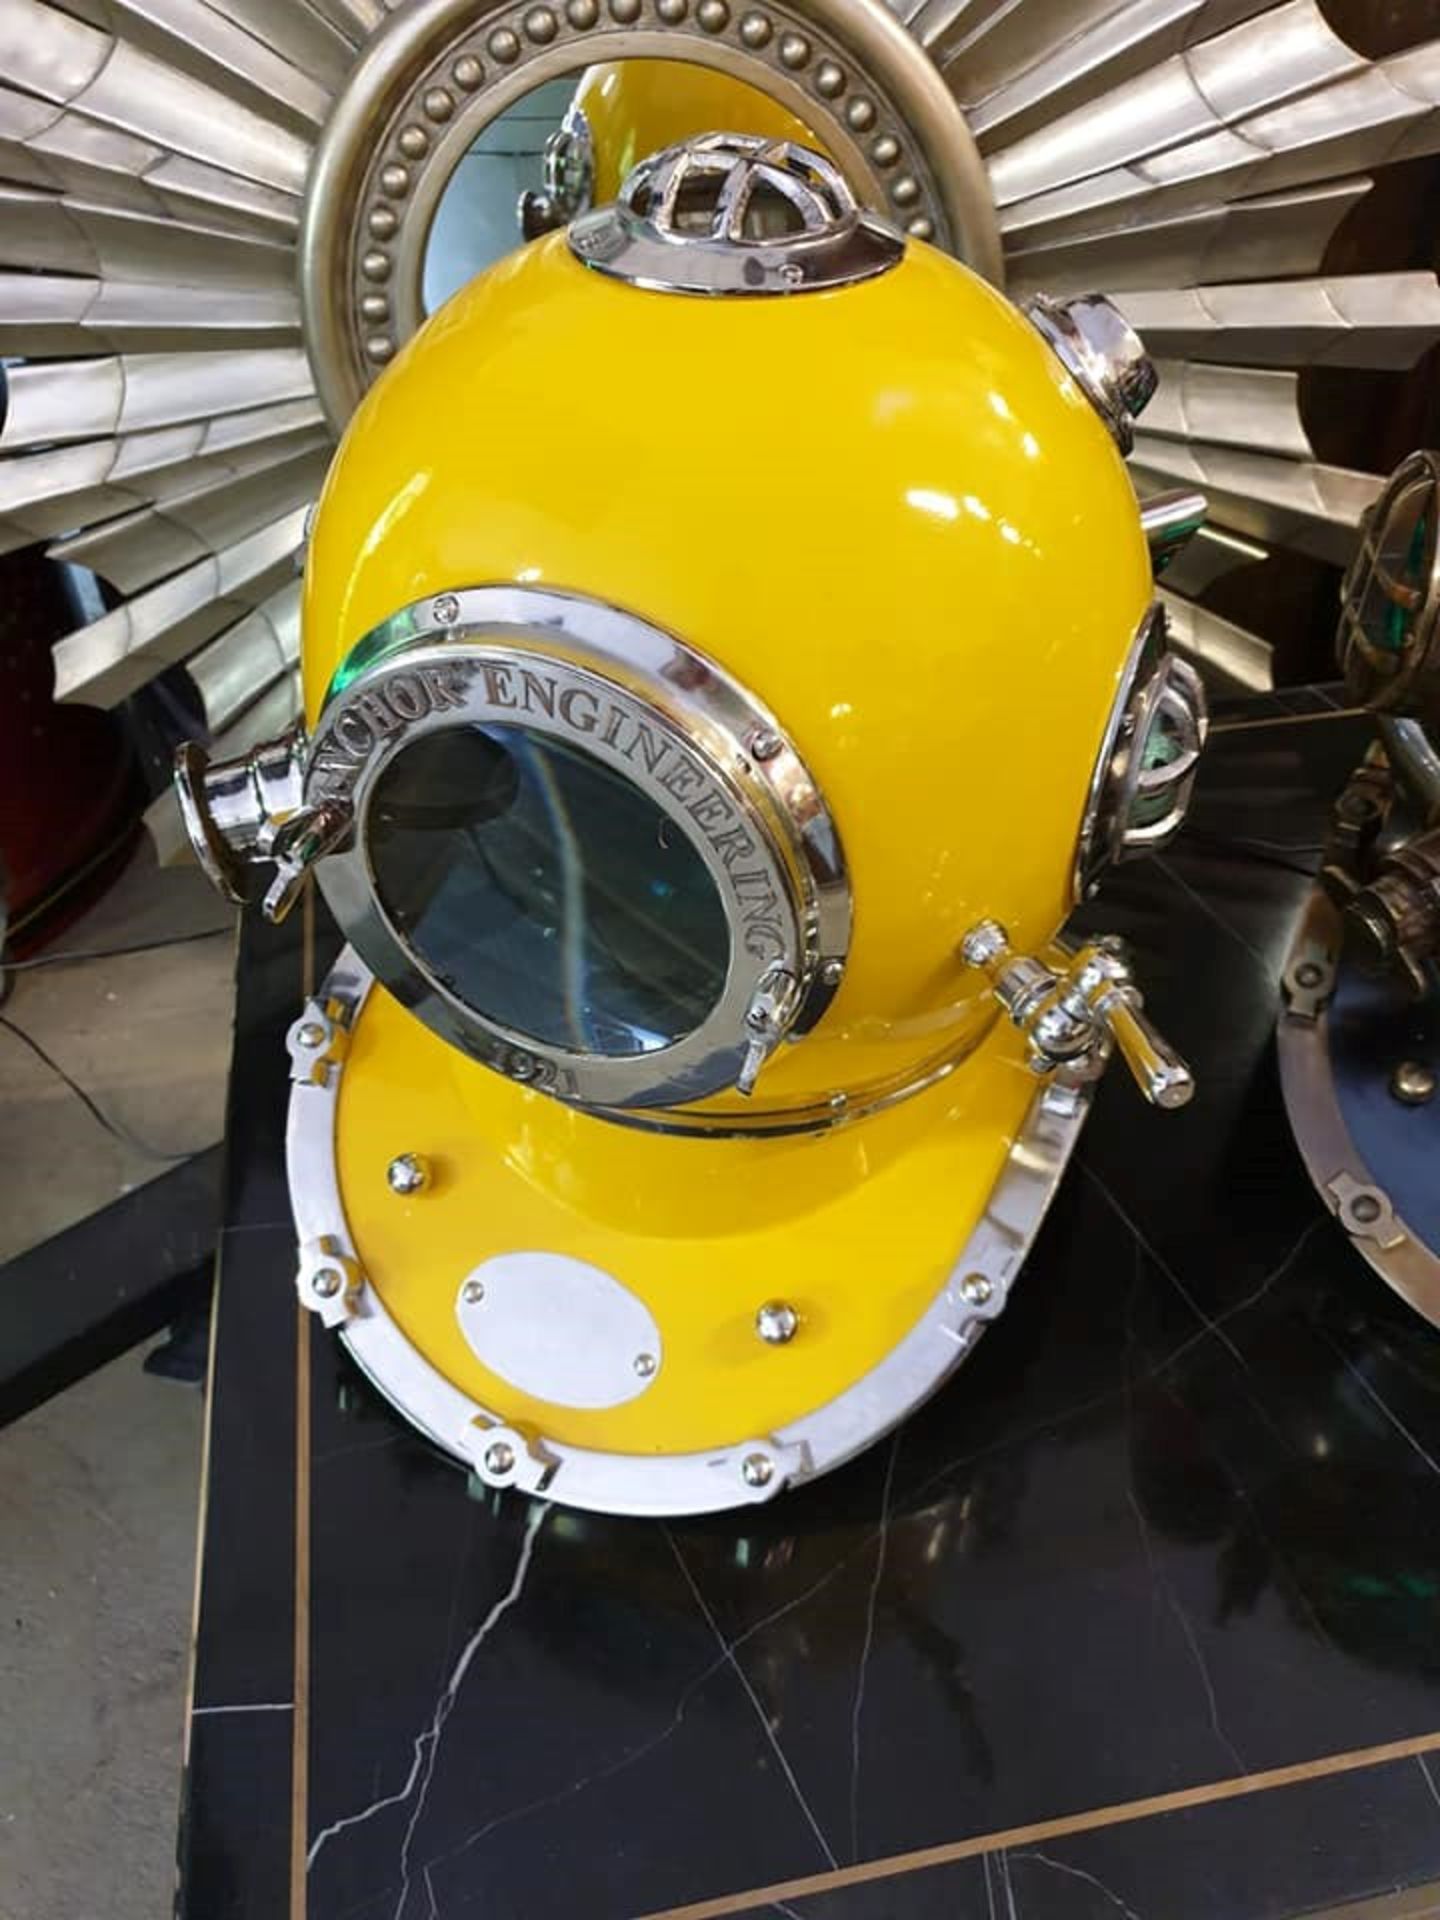 Reproduction Anchor Engineering 1921 Scuba Diving Marine Divers Helmet Deep Sea Chrome Yellow Finish - Image 3 of 3